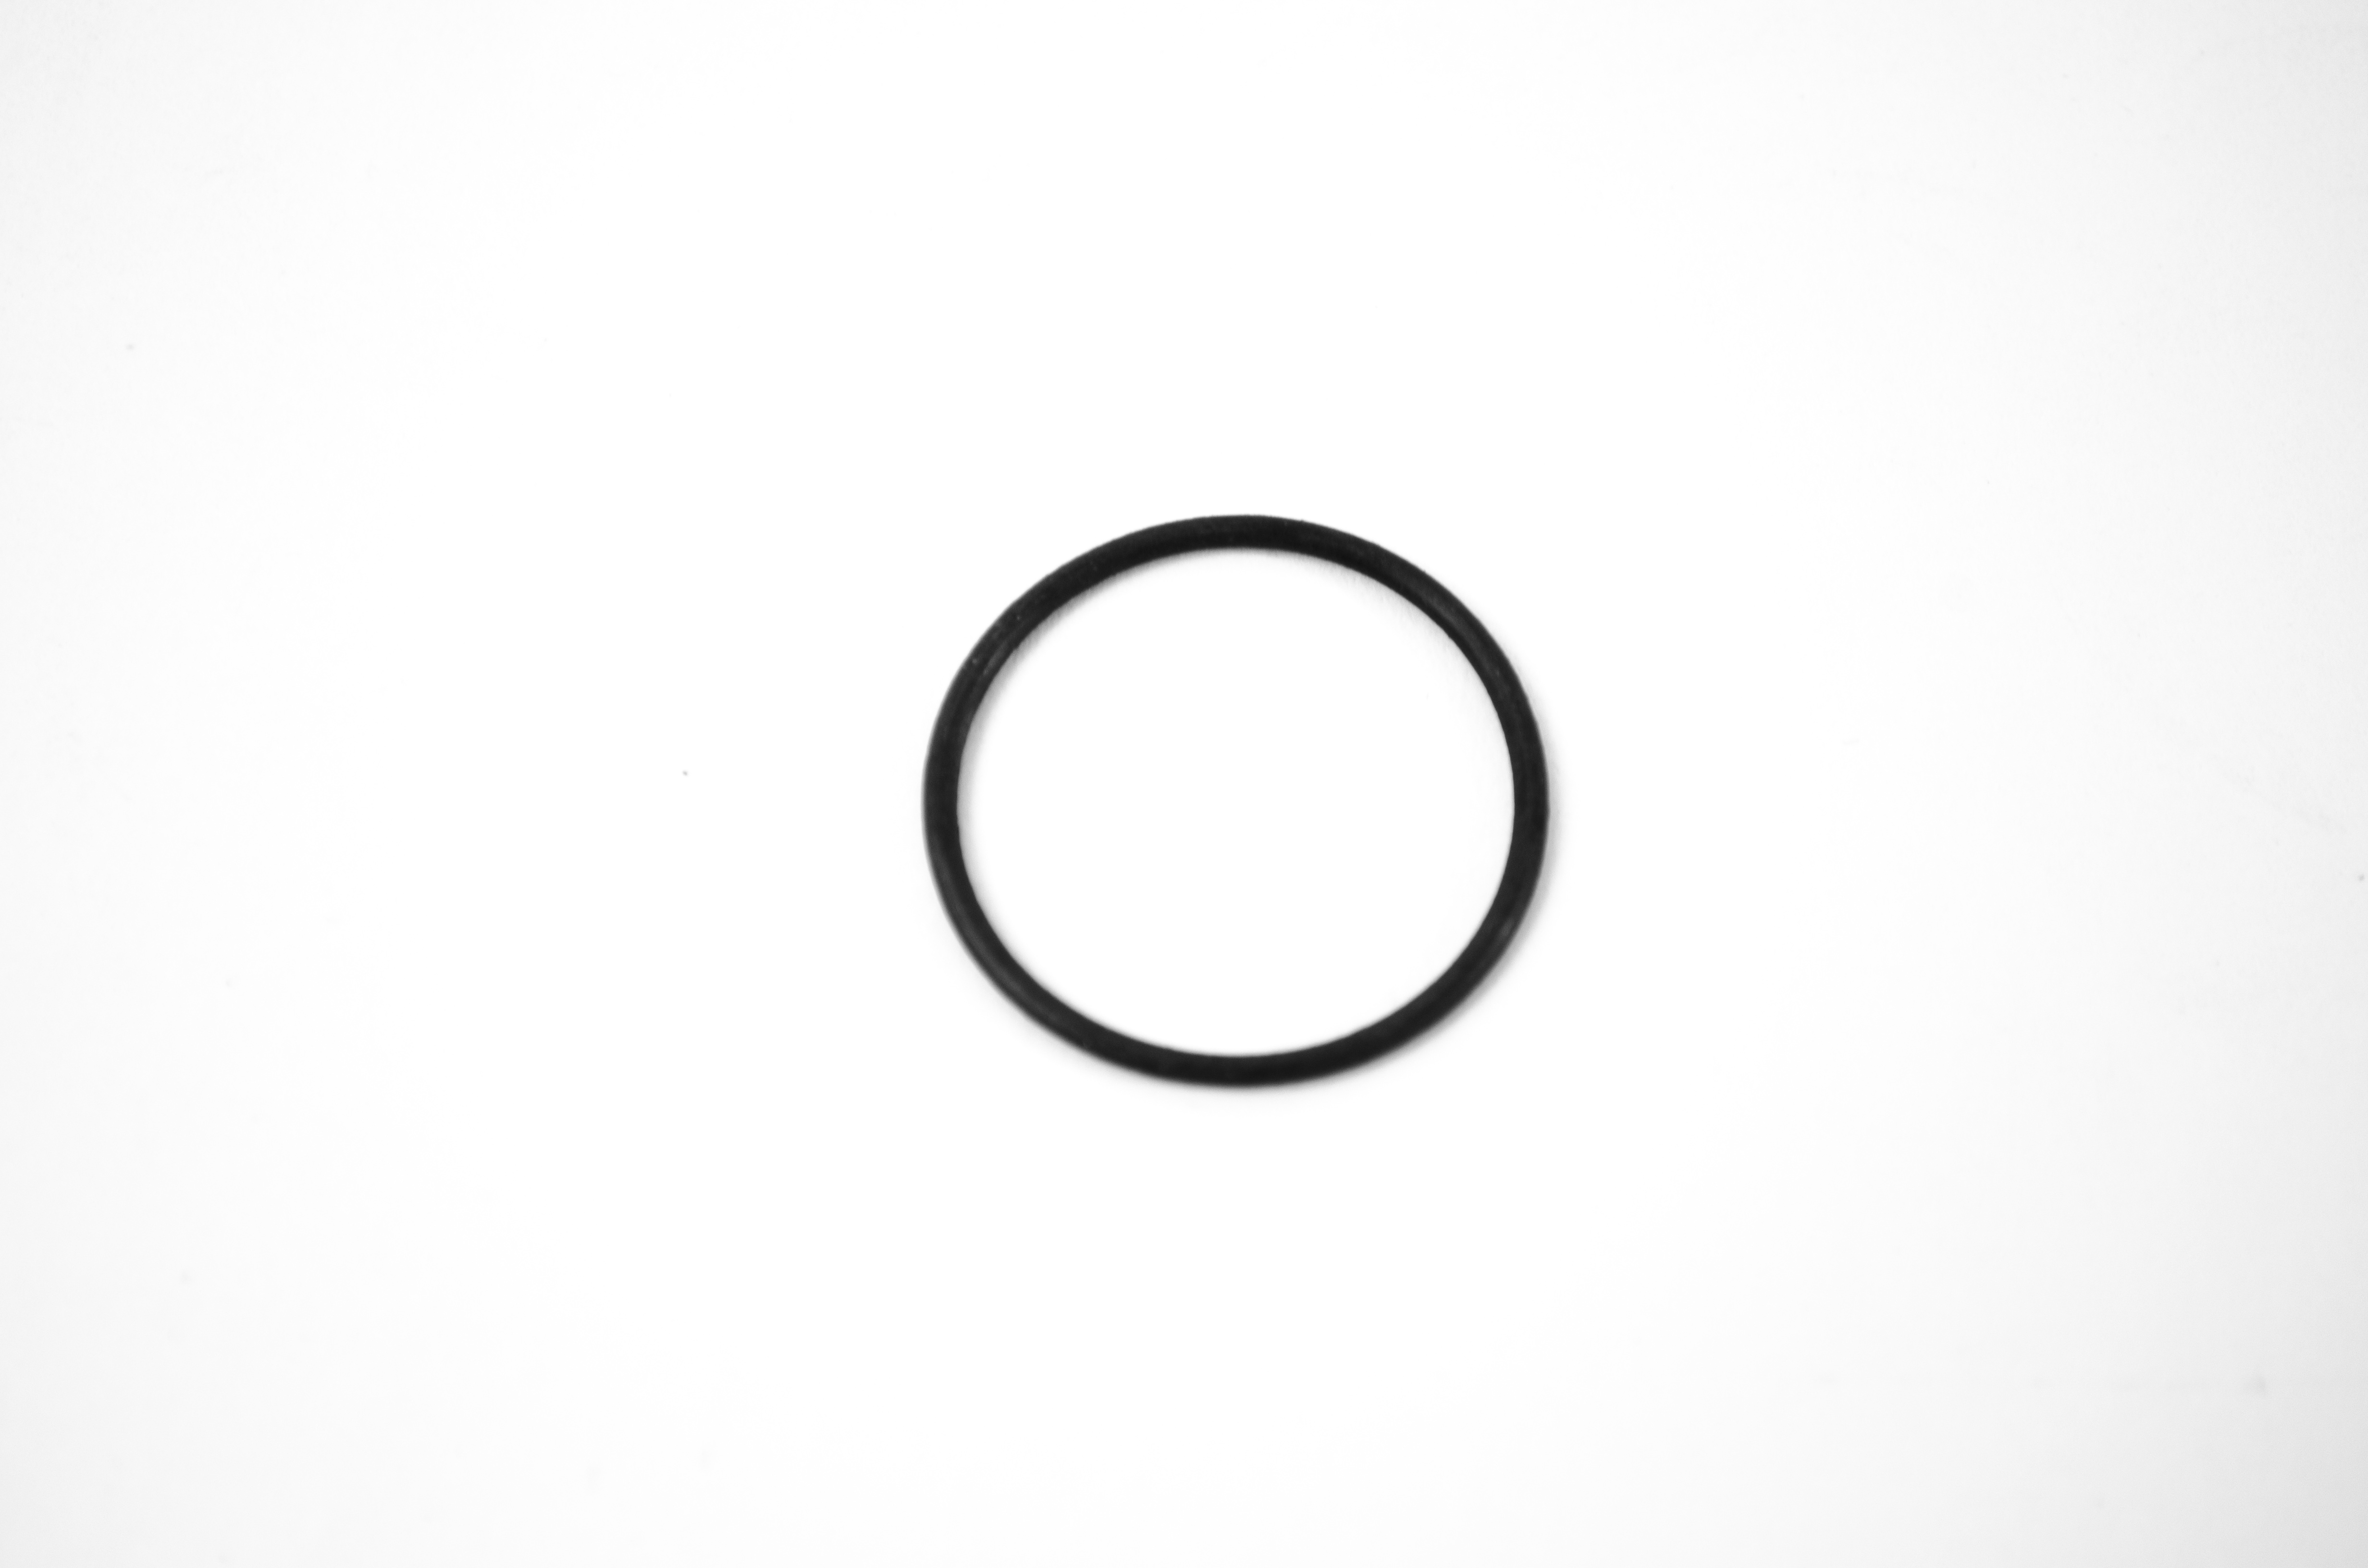 OEM O-Ring: Adjustable Lever Knob Seal Ring (Larger of Two - Base) - 160, 180, 185, 190, 290 Series